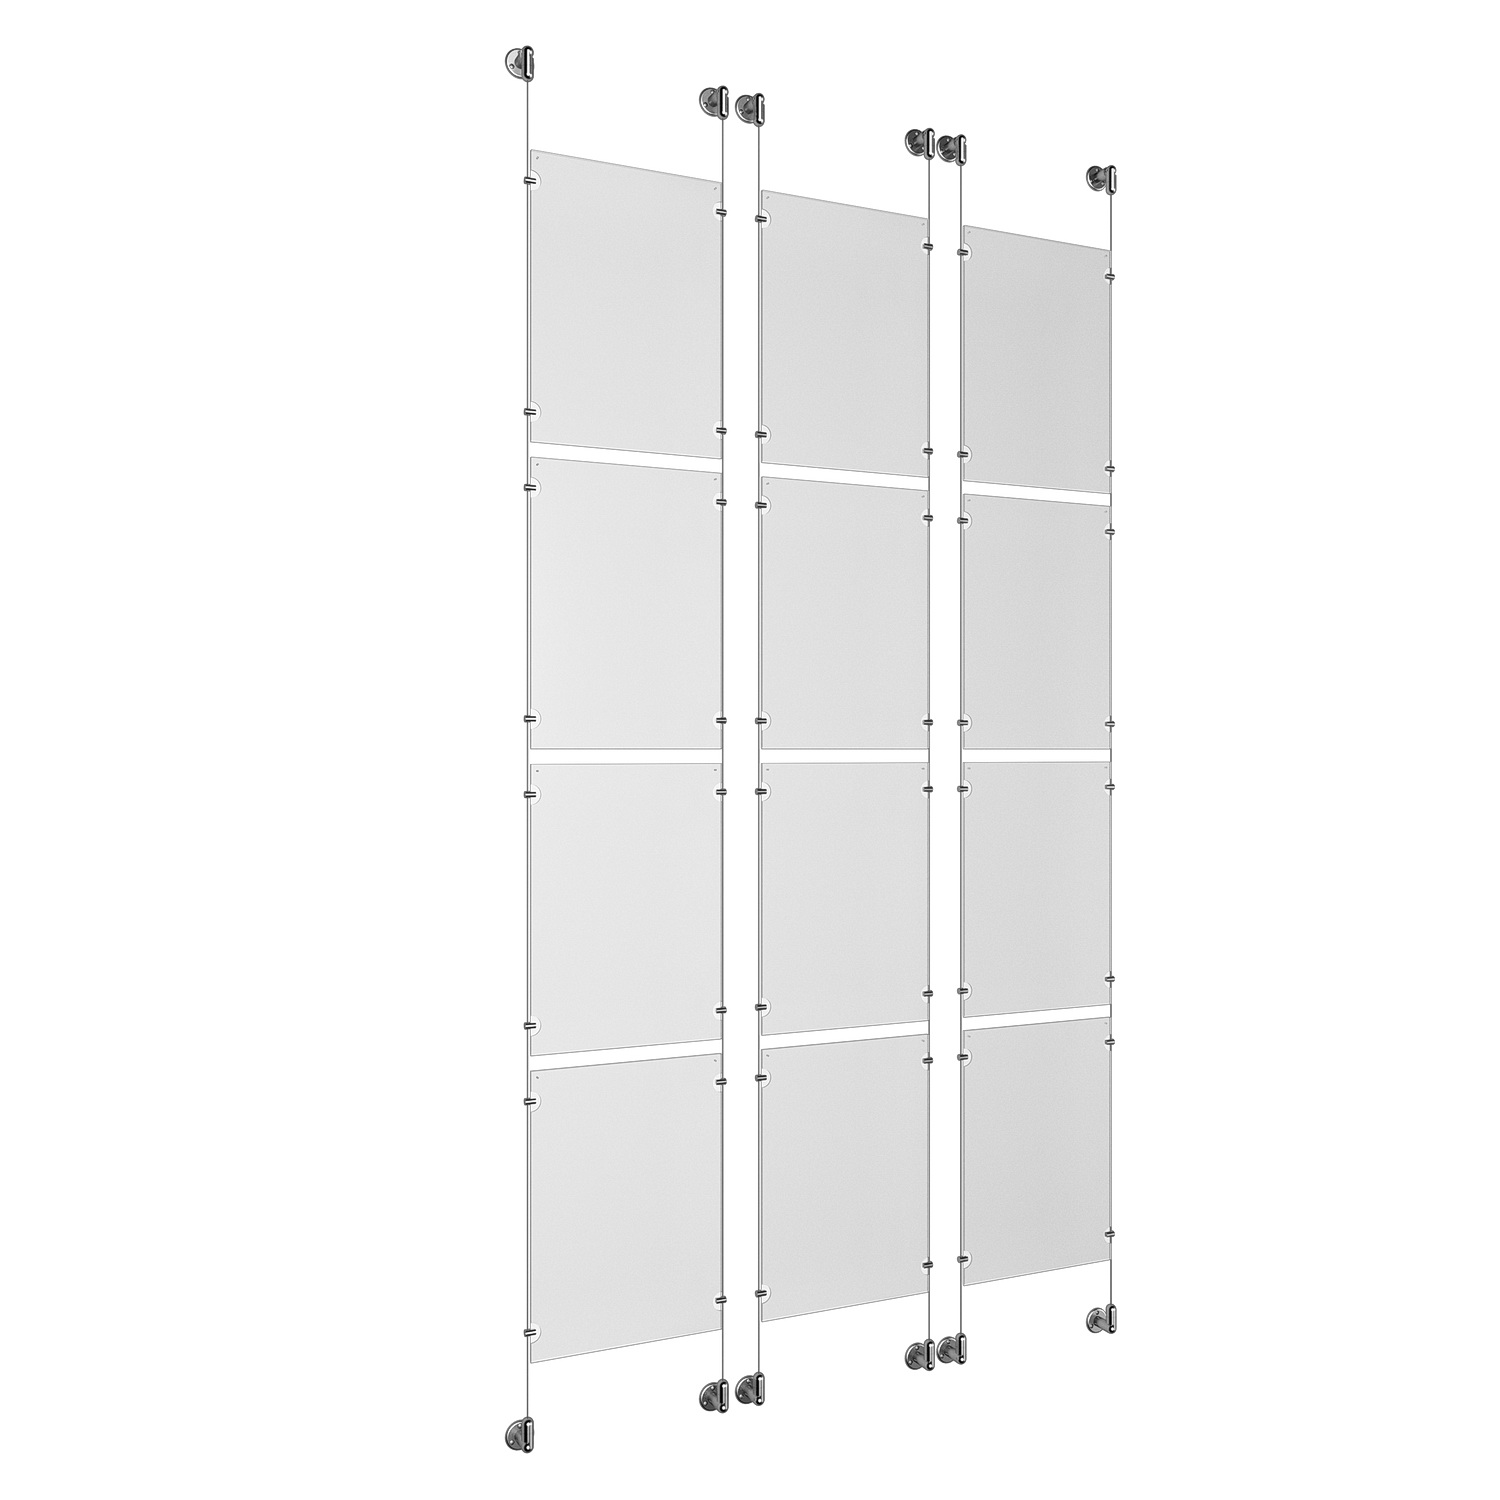 (12) 11'' Width x 17'' Height Clear Acrylic Frame & (6) Aluminum Clear Anodized Adjustable Angle Cable Systems with (48) Single-Sided Panel Grippers